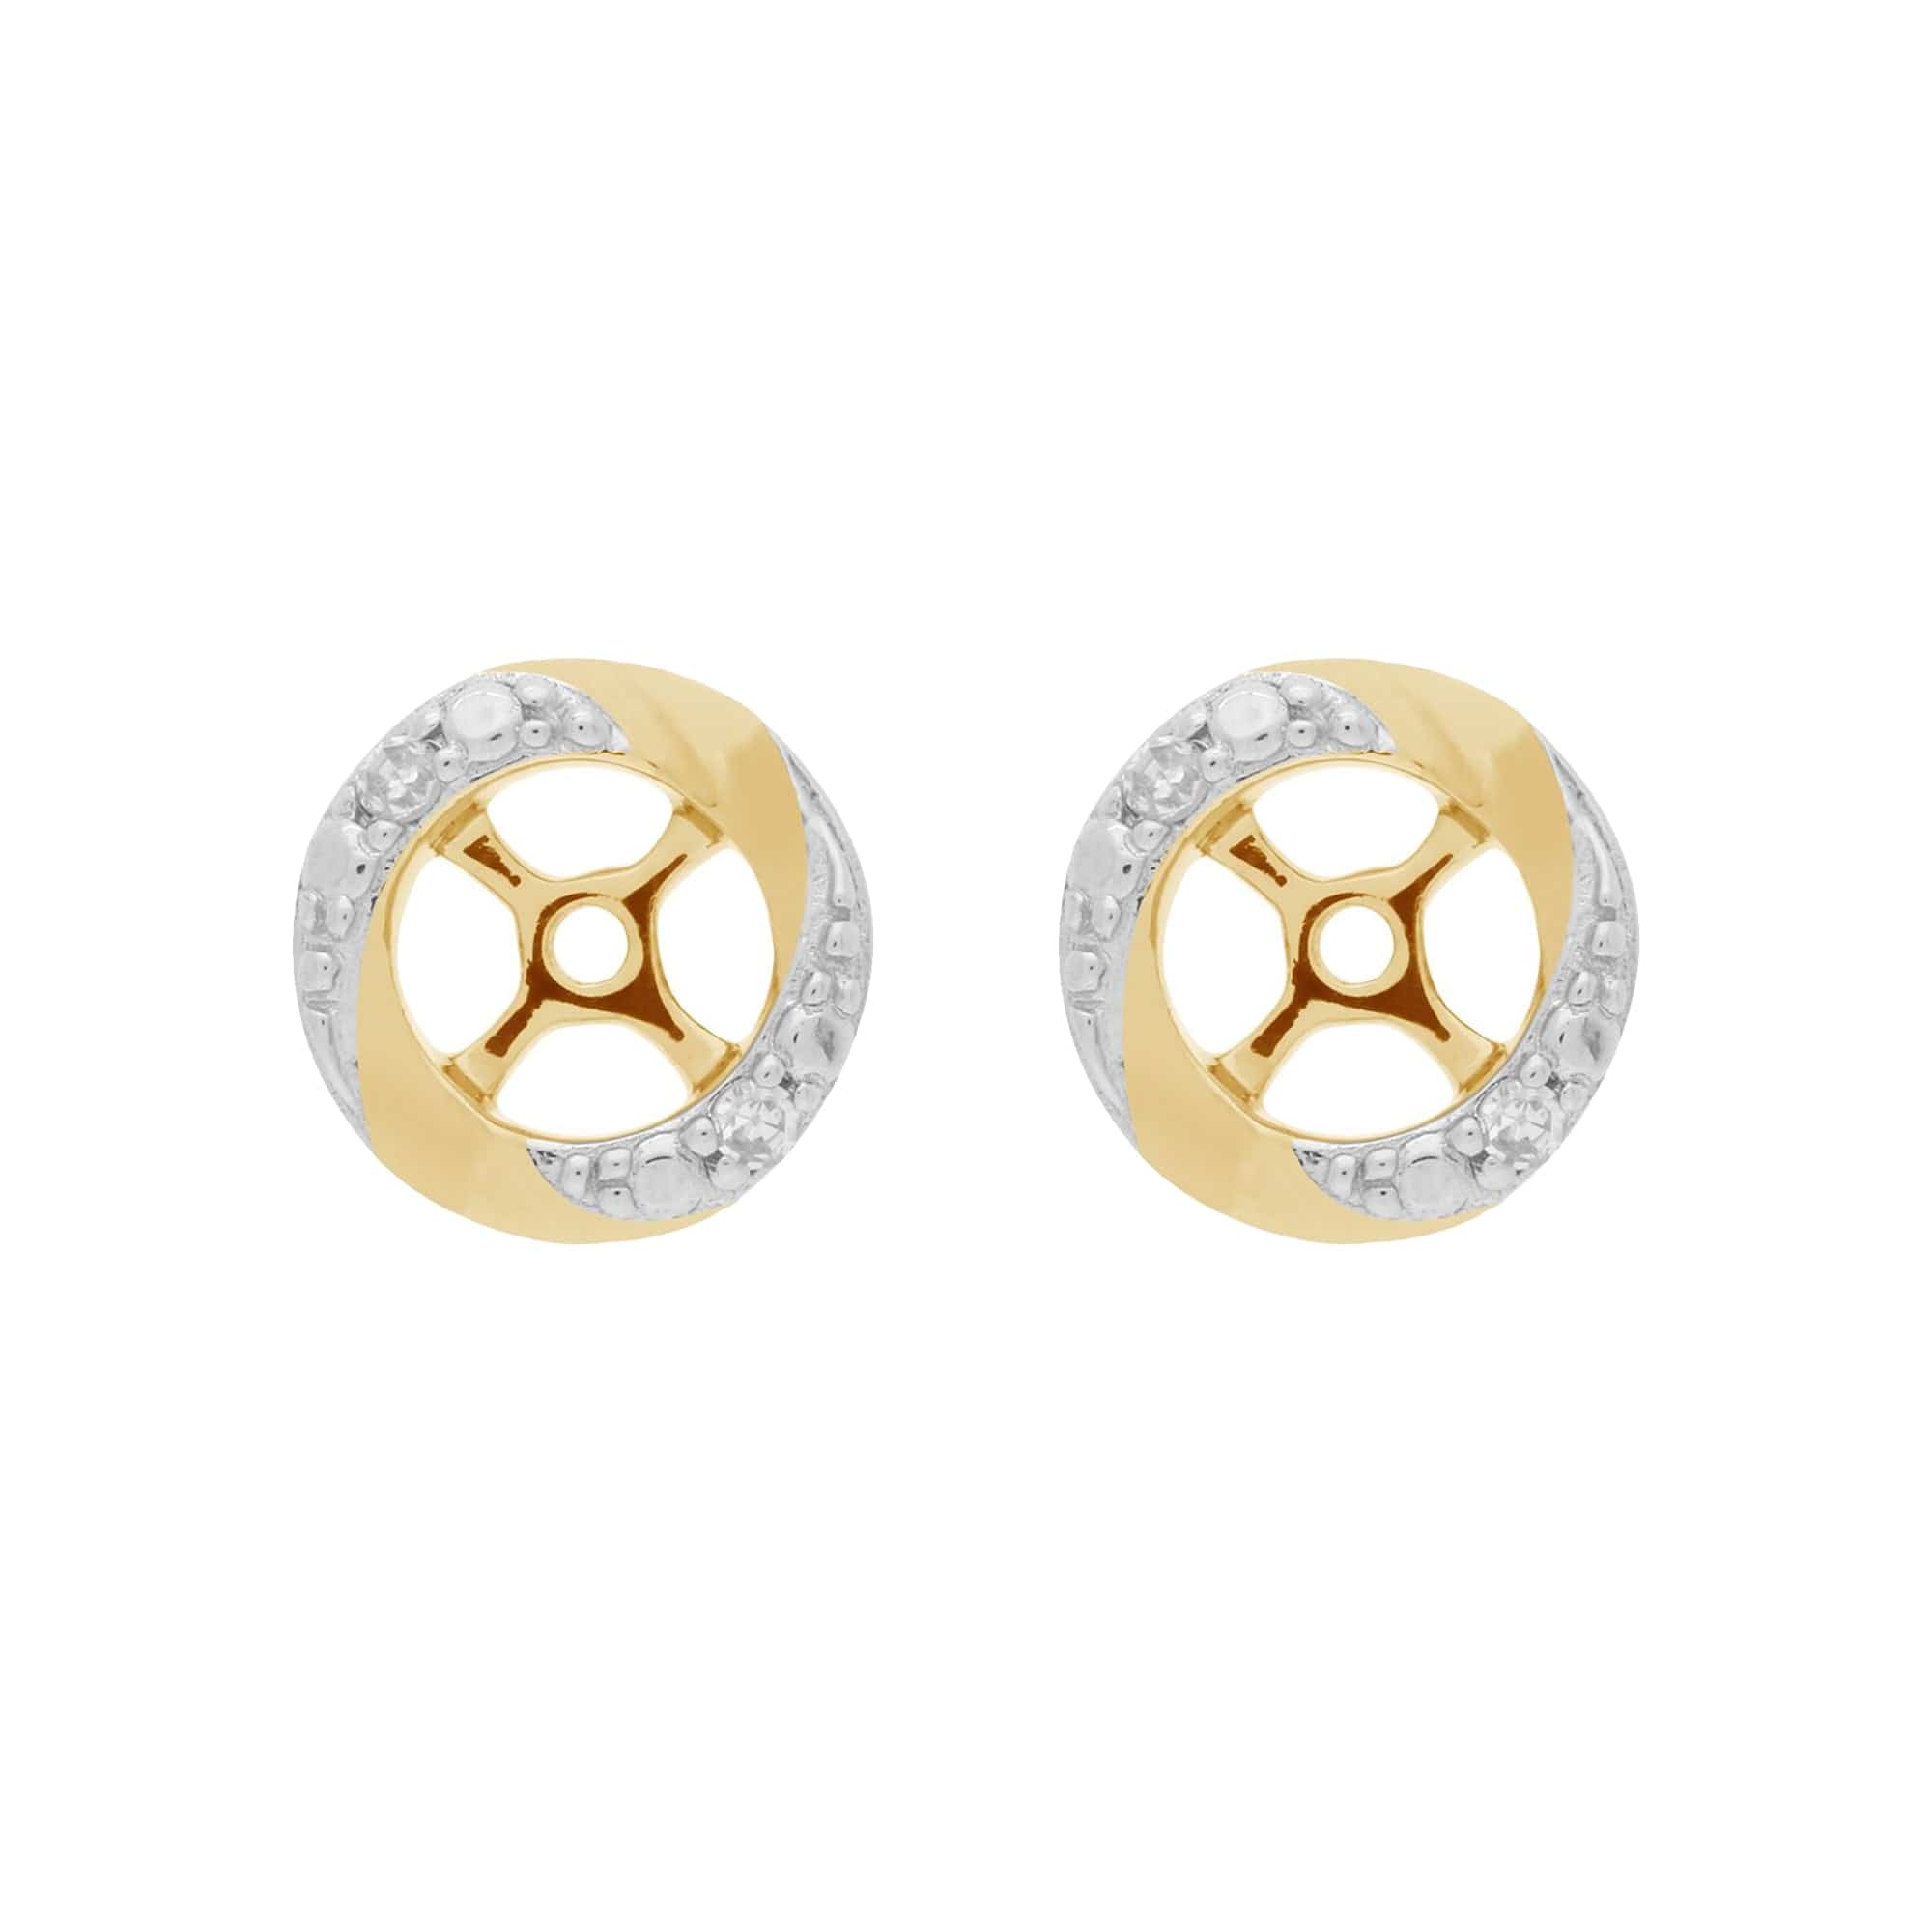 Classic Round Blue Topaz Stud Earrings with Detachable Diamond Halo Ear Jacket in 9ct Yellow Gold - Gemondo